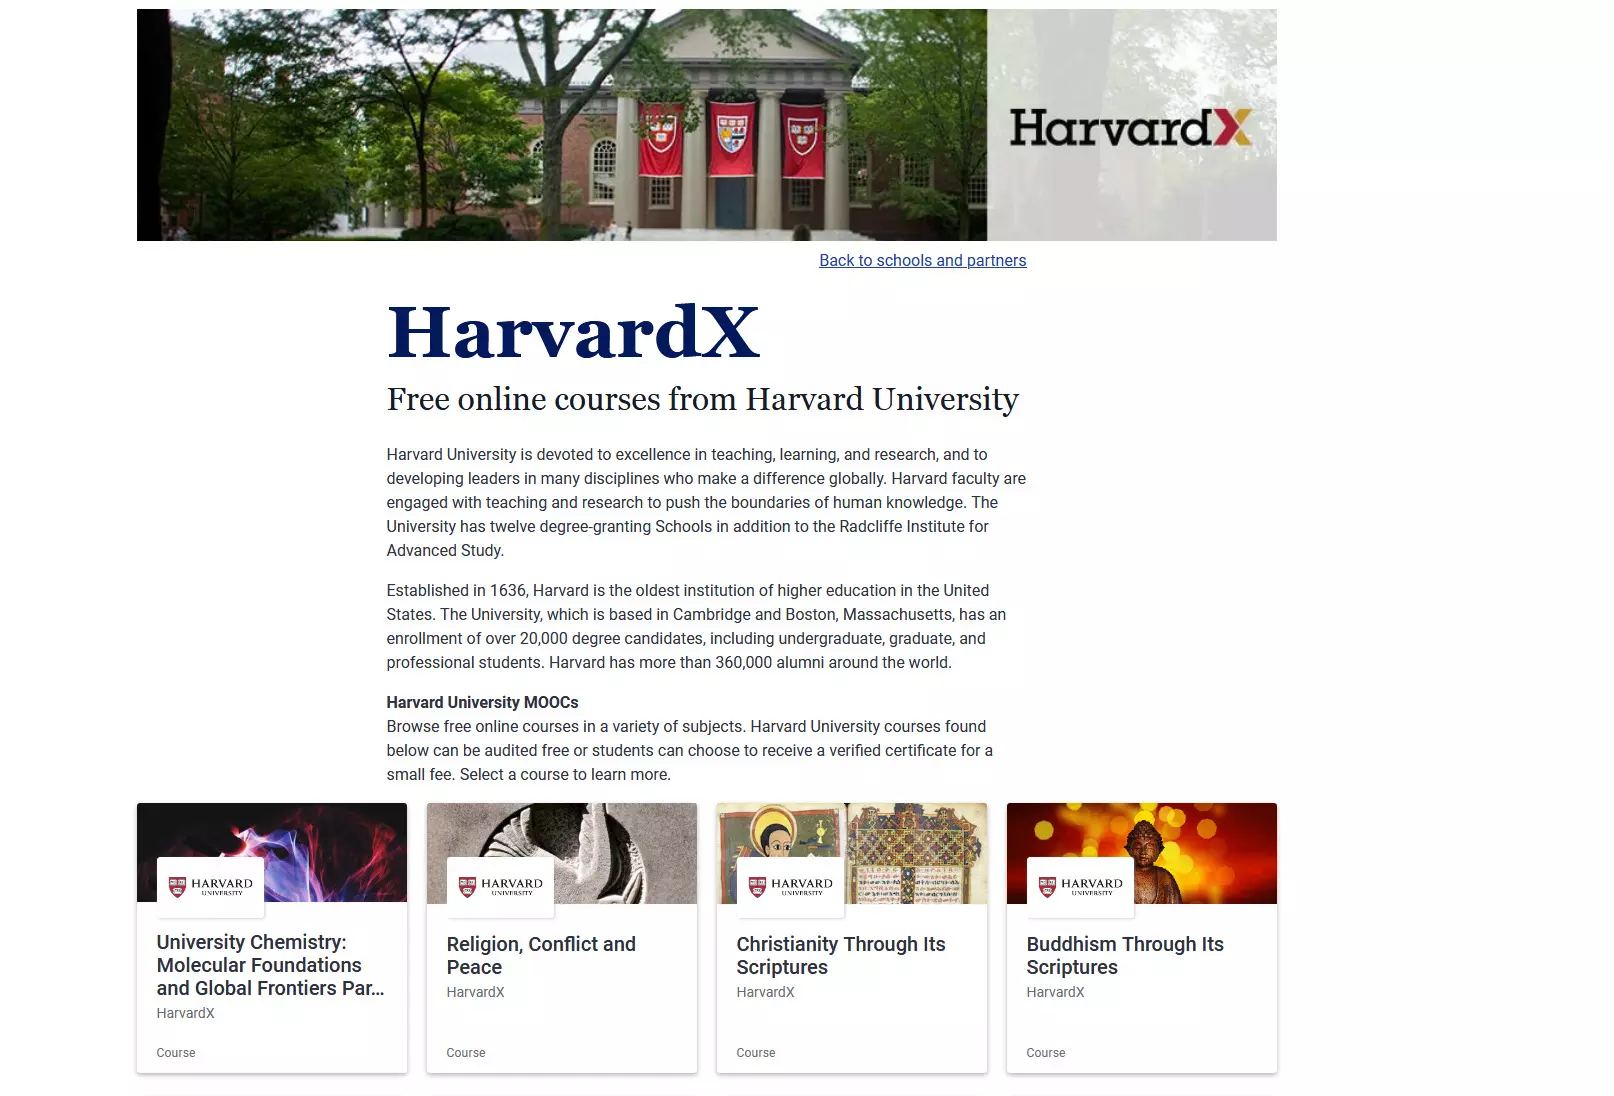 Harvard University Free Online Course on contracts 2020